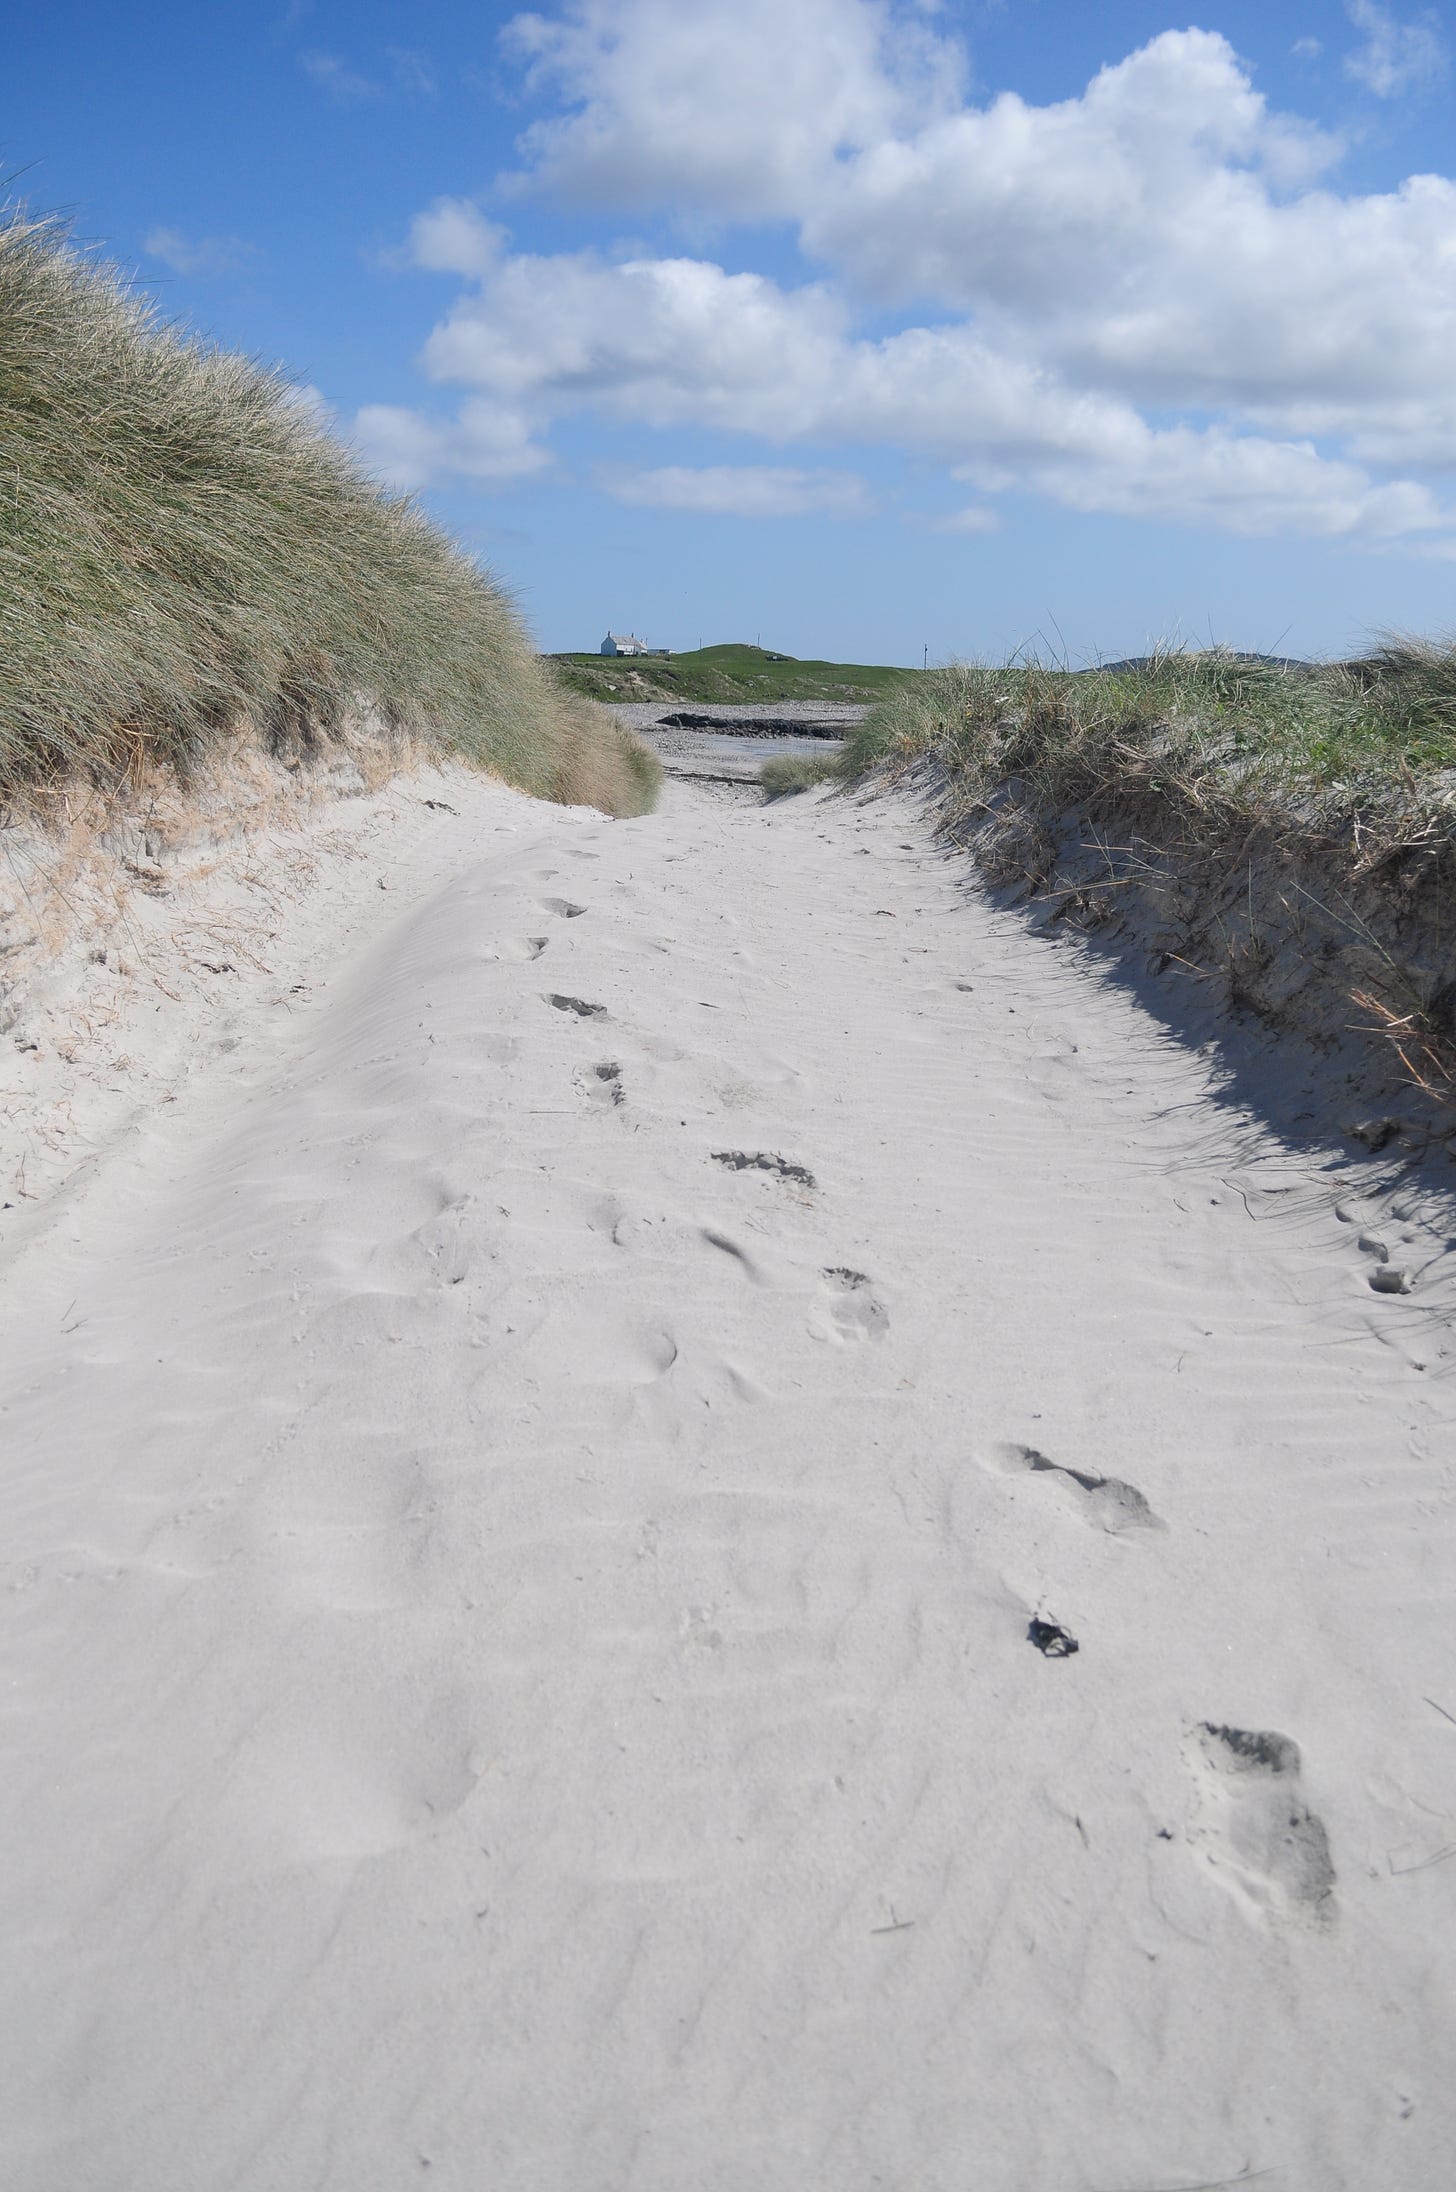 Footsteps in a sanddune on a sunny day. There is grass and bents around the path in the sand. We can see a small house in the distance and puffy white clouds in the blue sky.